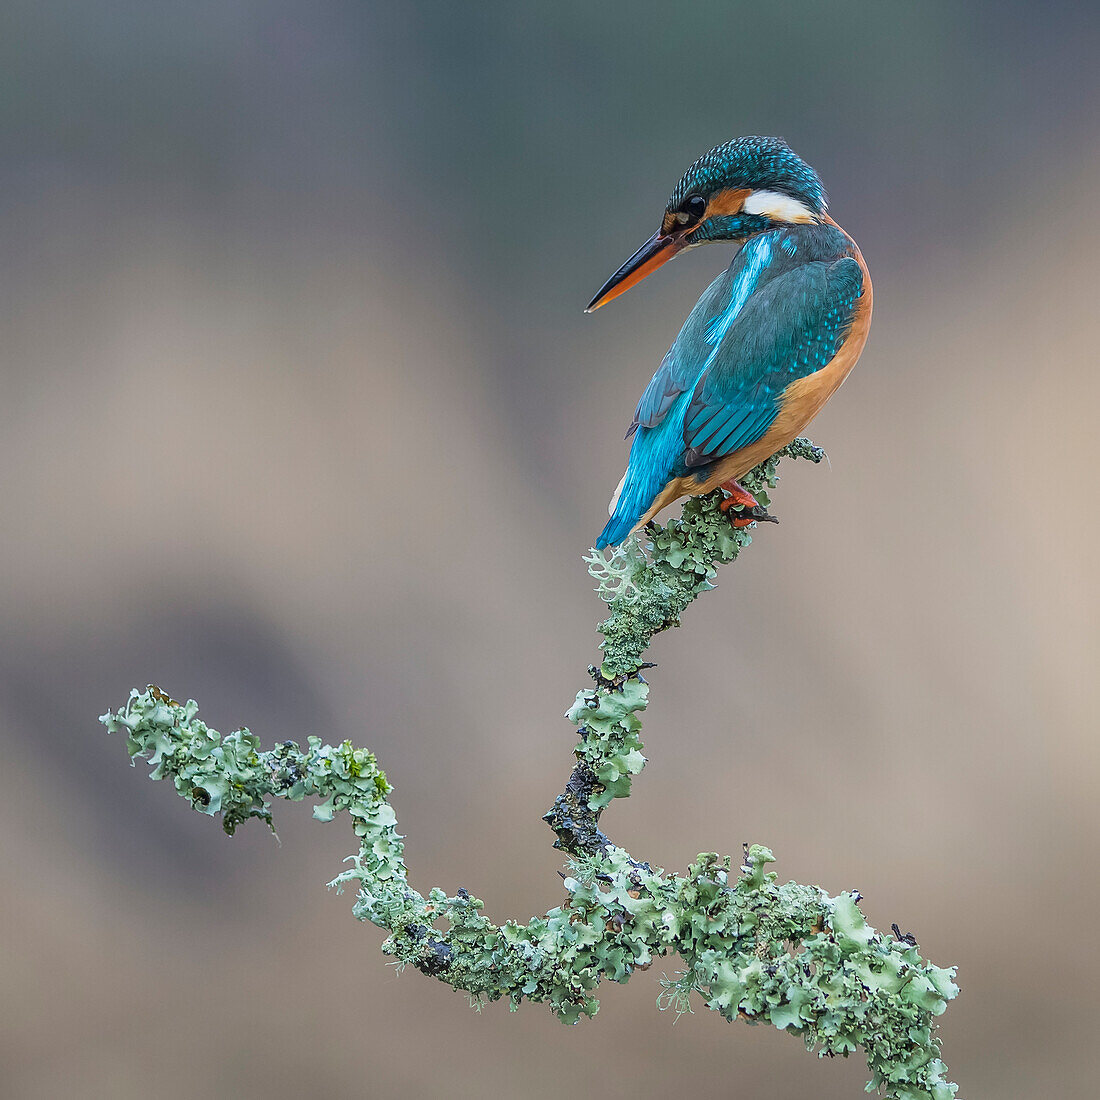 Female Kingfisher (Alcedinidae) perched on the branch of a tree covered in green foliage; Dumfries and Galloway, Scotland